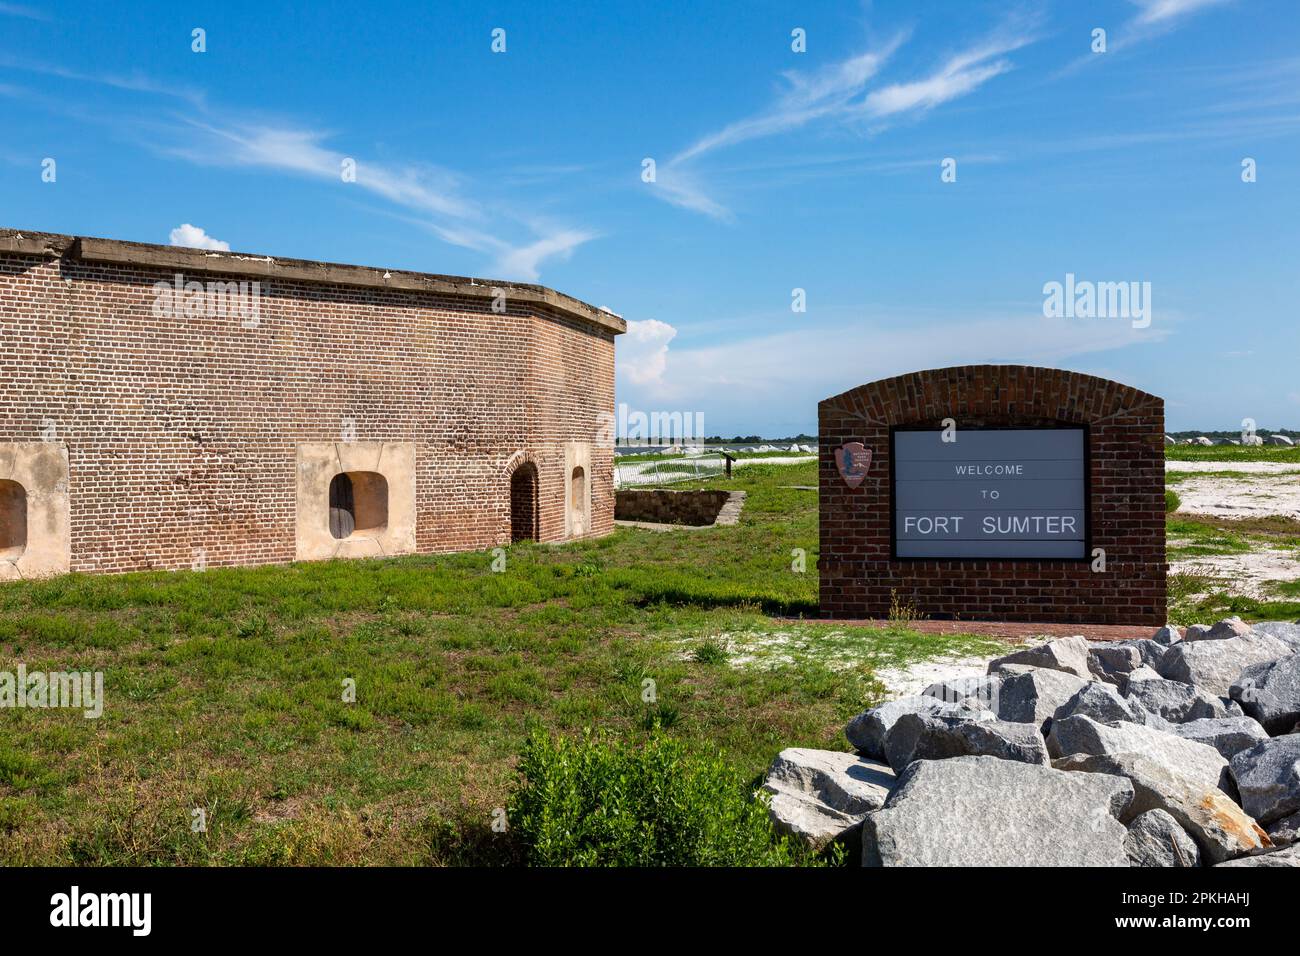 The welcome sign at Fort Sumter National Monument in Charleston Harbor, South Carolina, USA. Stock Photo